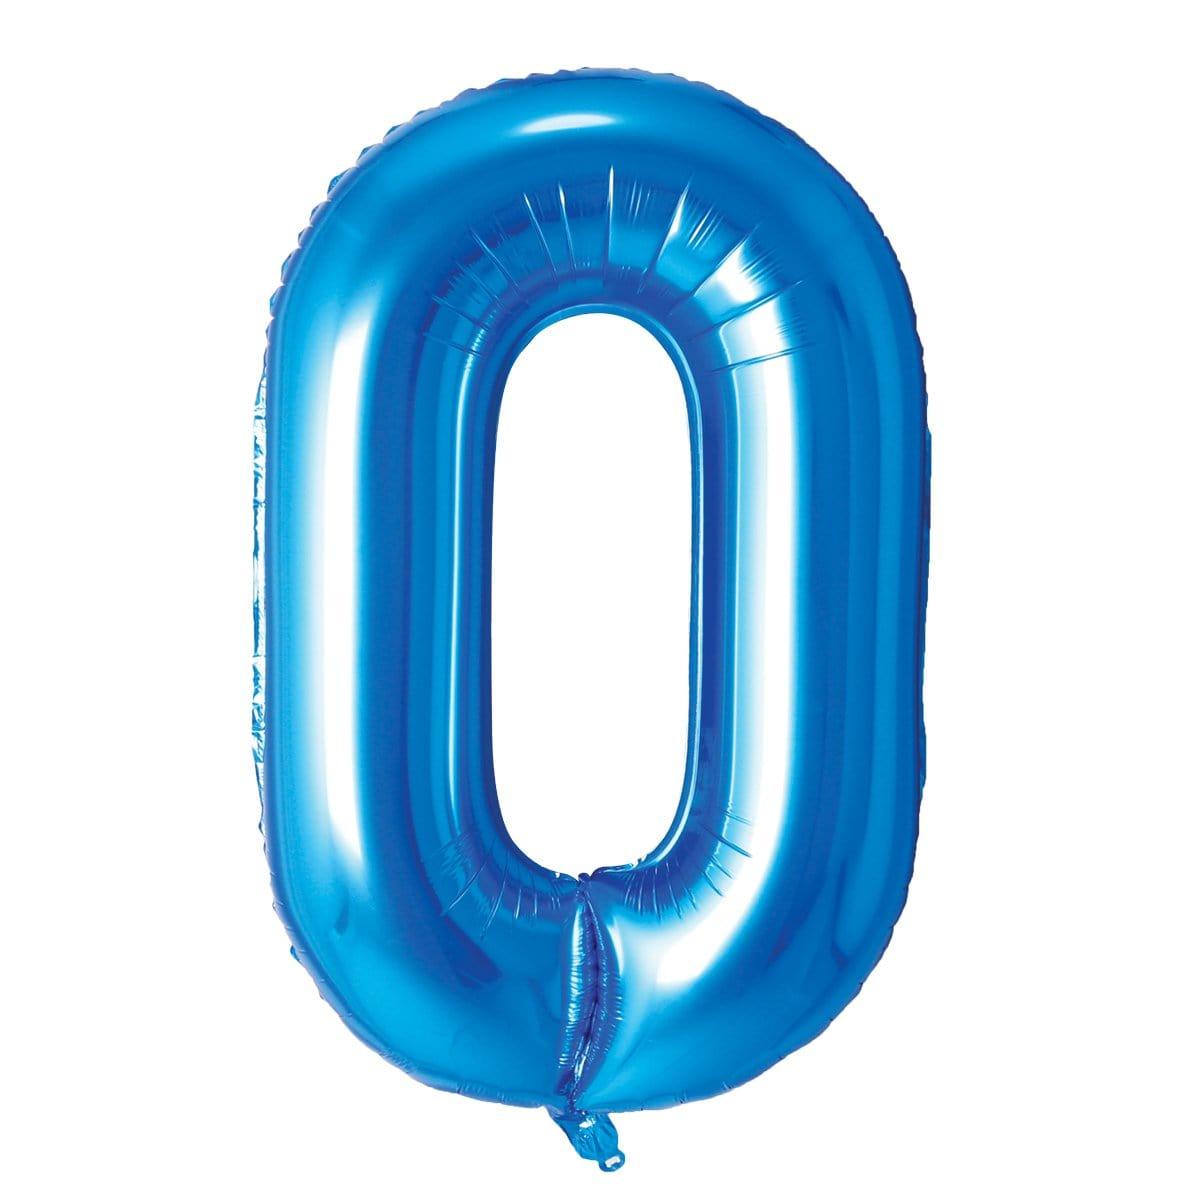 Buy Balloons Blue Number 0 Foil Balloon, 34 Inches sold at Party Expert